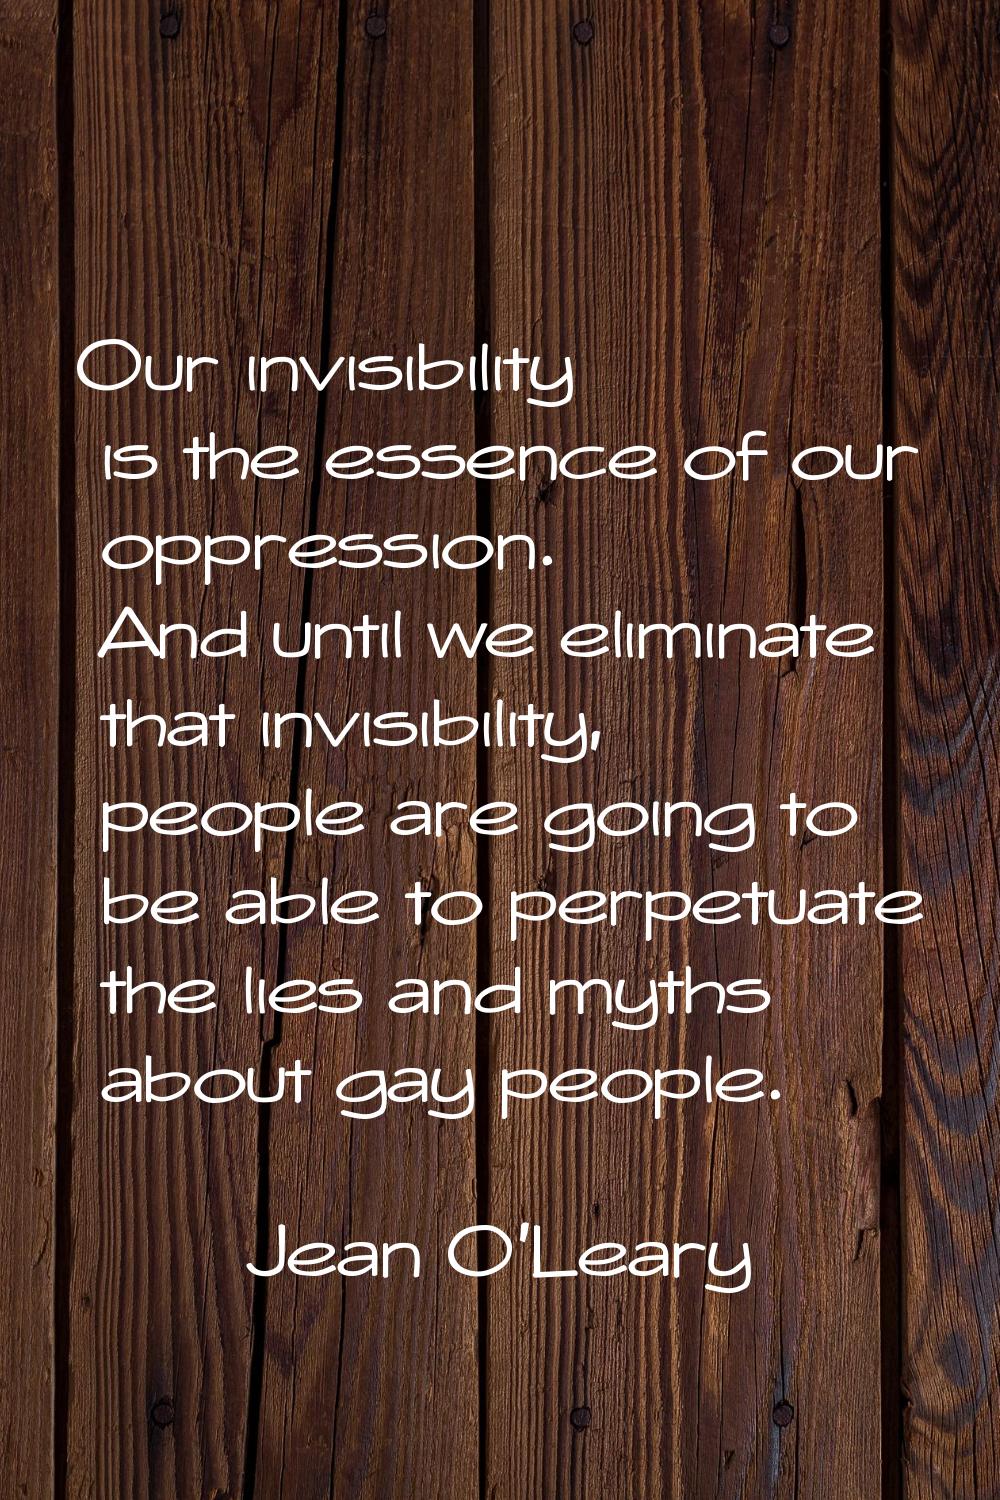 Our invisibility is the essence of our oppression. And until we eliminate that invisibility, people